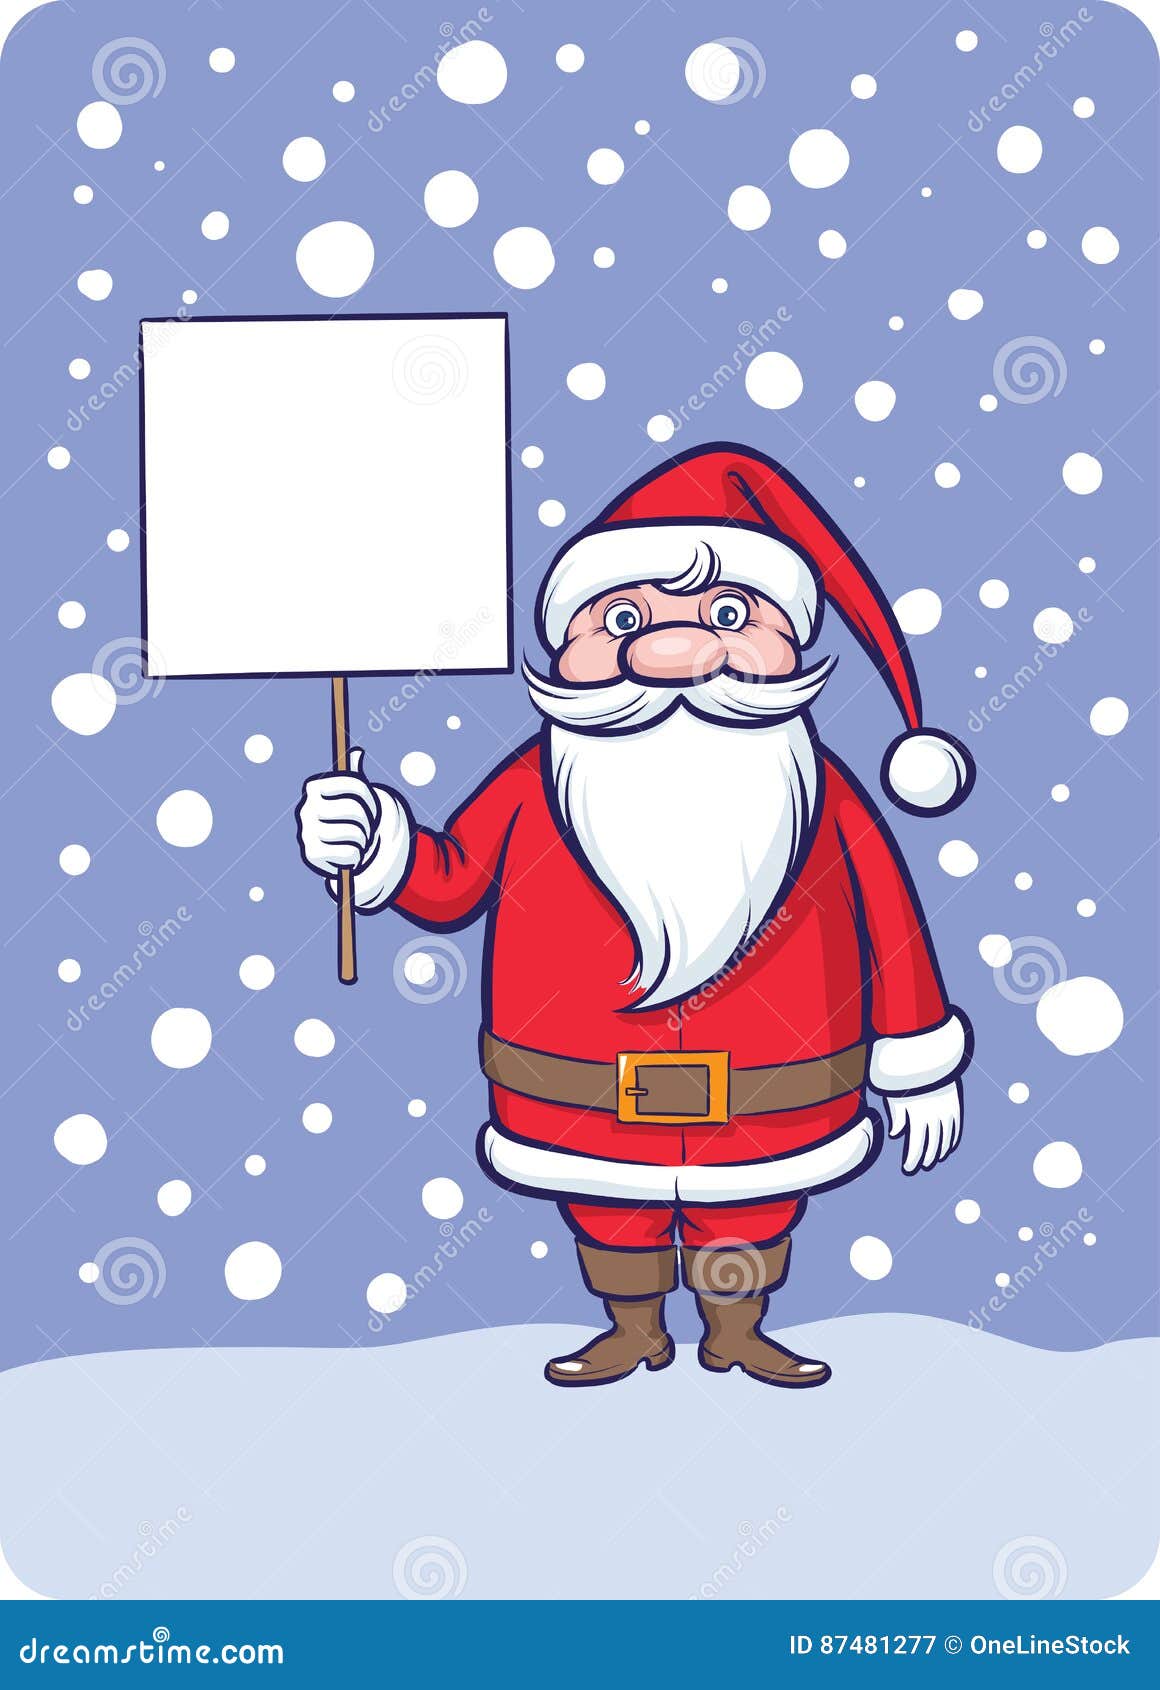 Standing Santa Claus With Blank Placard Stock Vector